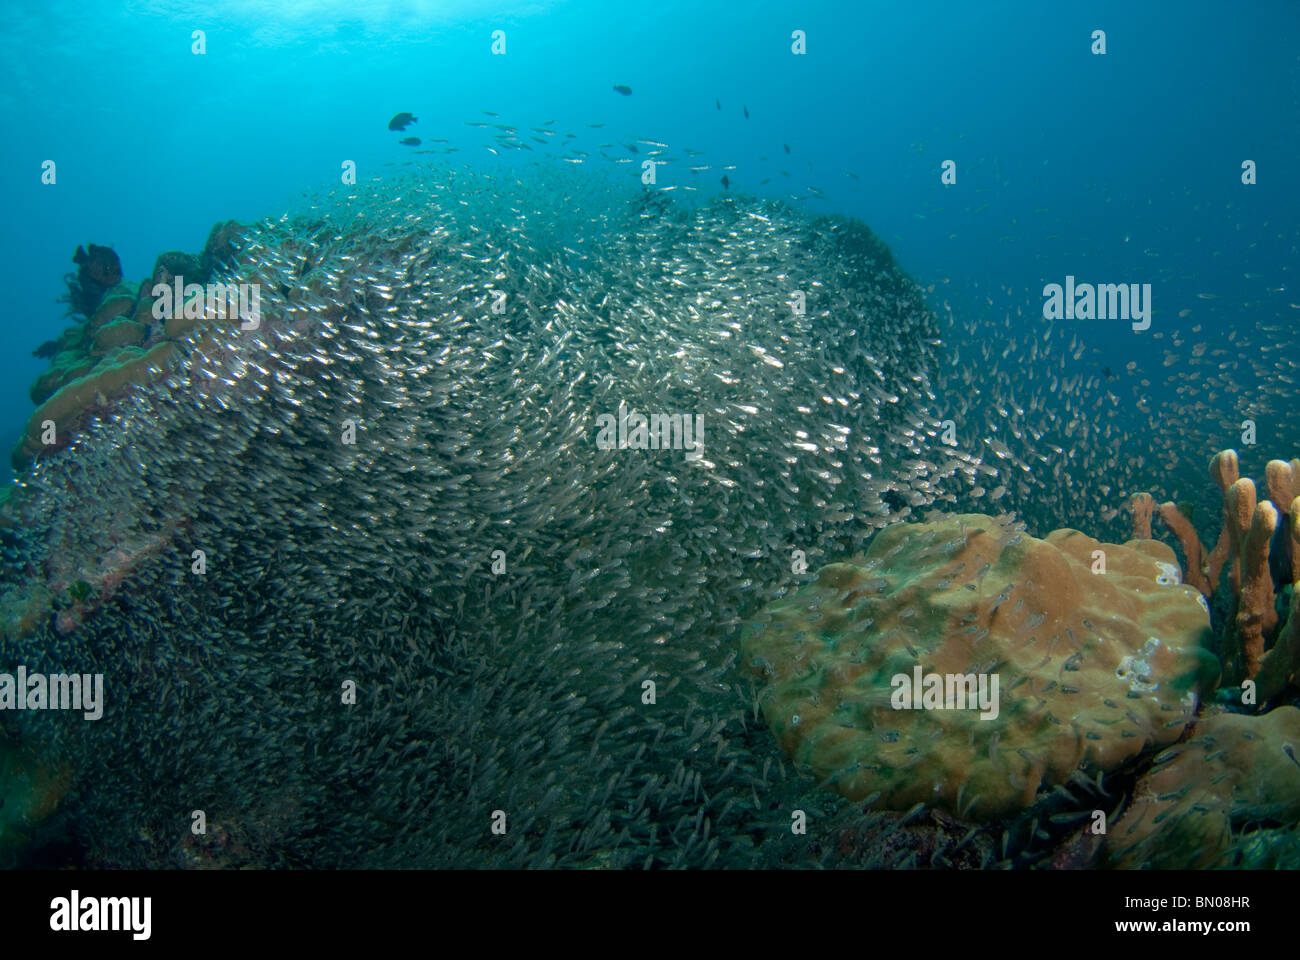 Large school of small silvery fishes, Similan Islands Stock Photo